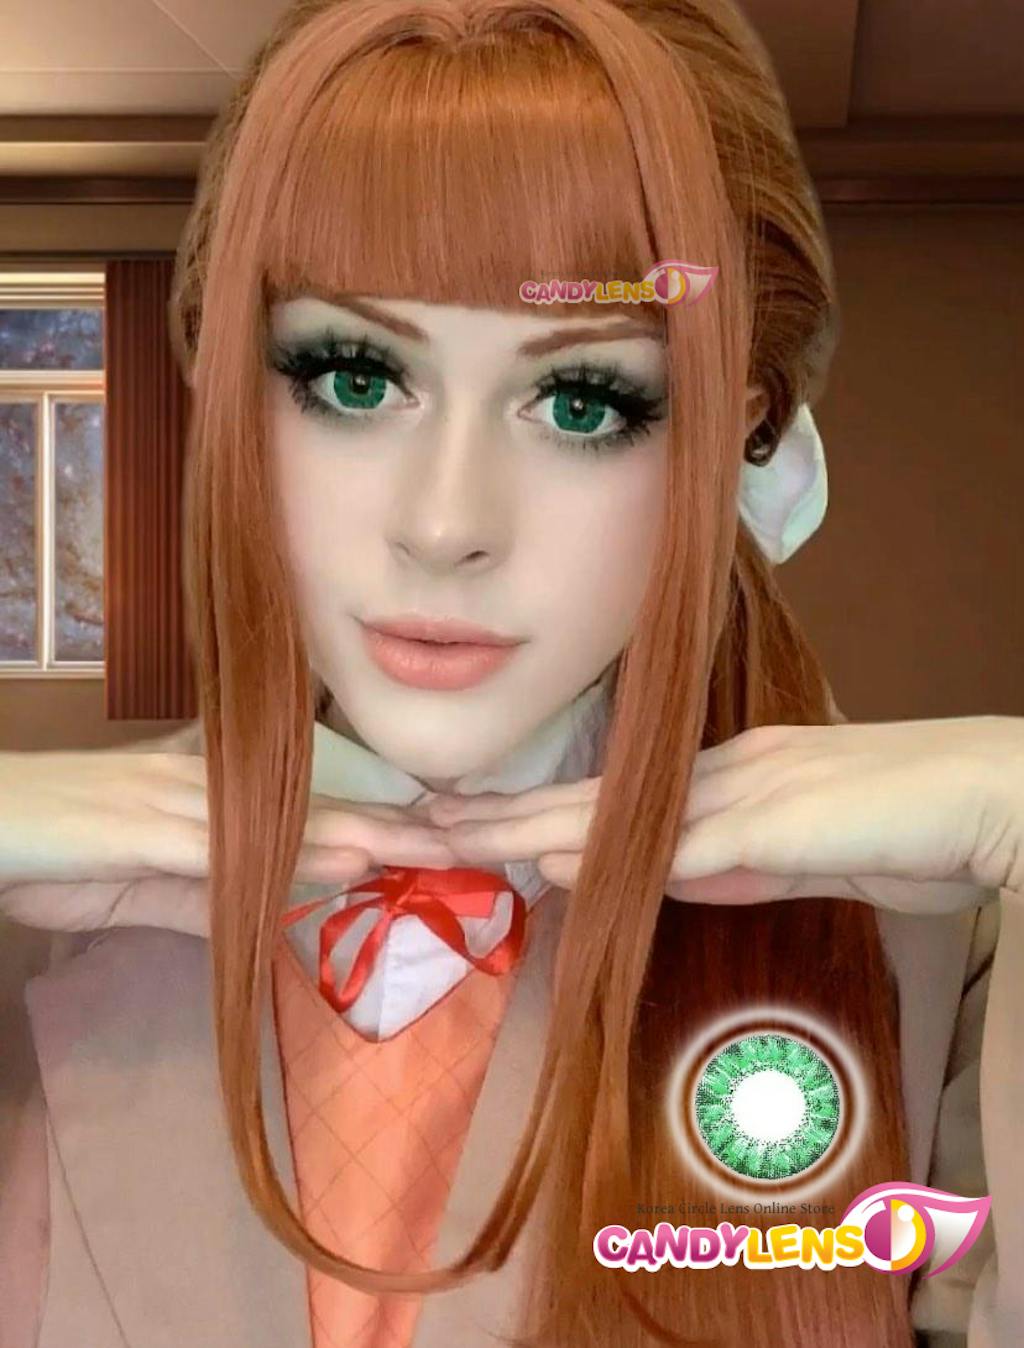 Level Up Your Cosplay with Anime and Video Game-Inspired Contact Lenses –  HoneyColor